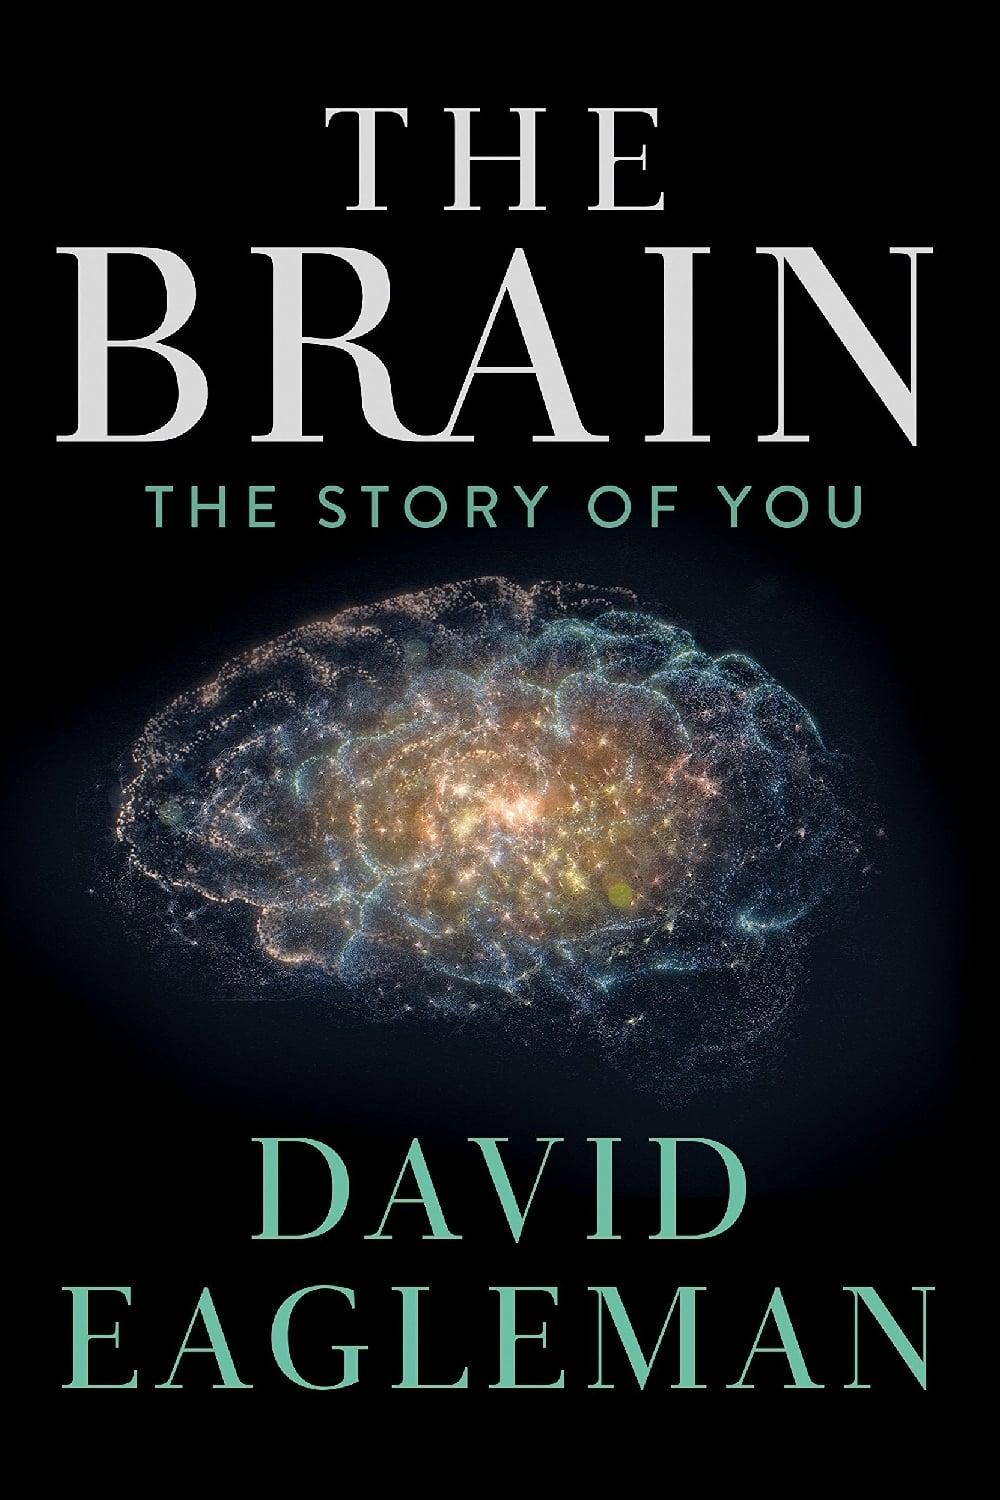 The Brain with David Eagleman poster